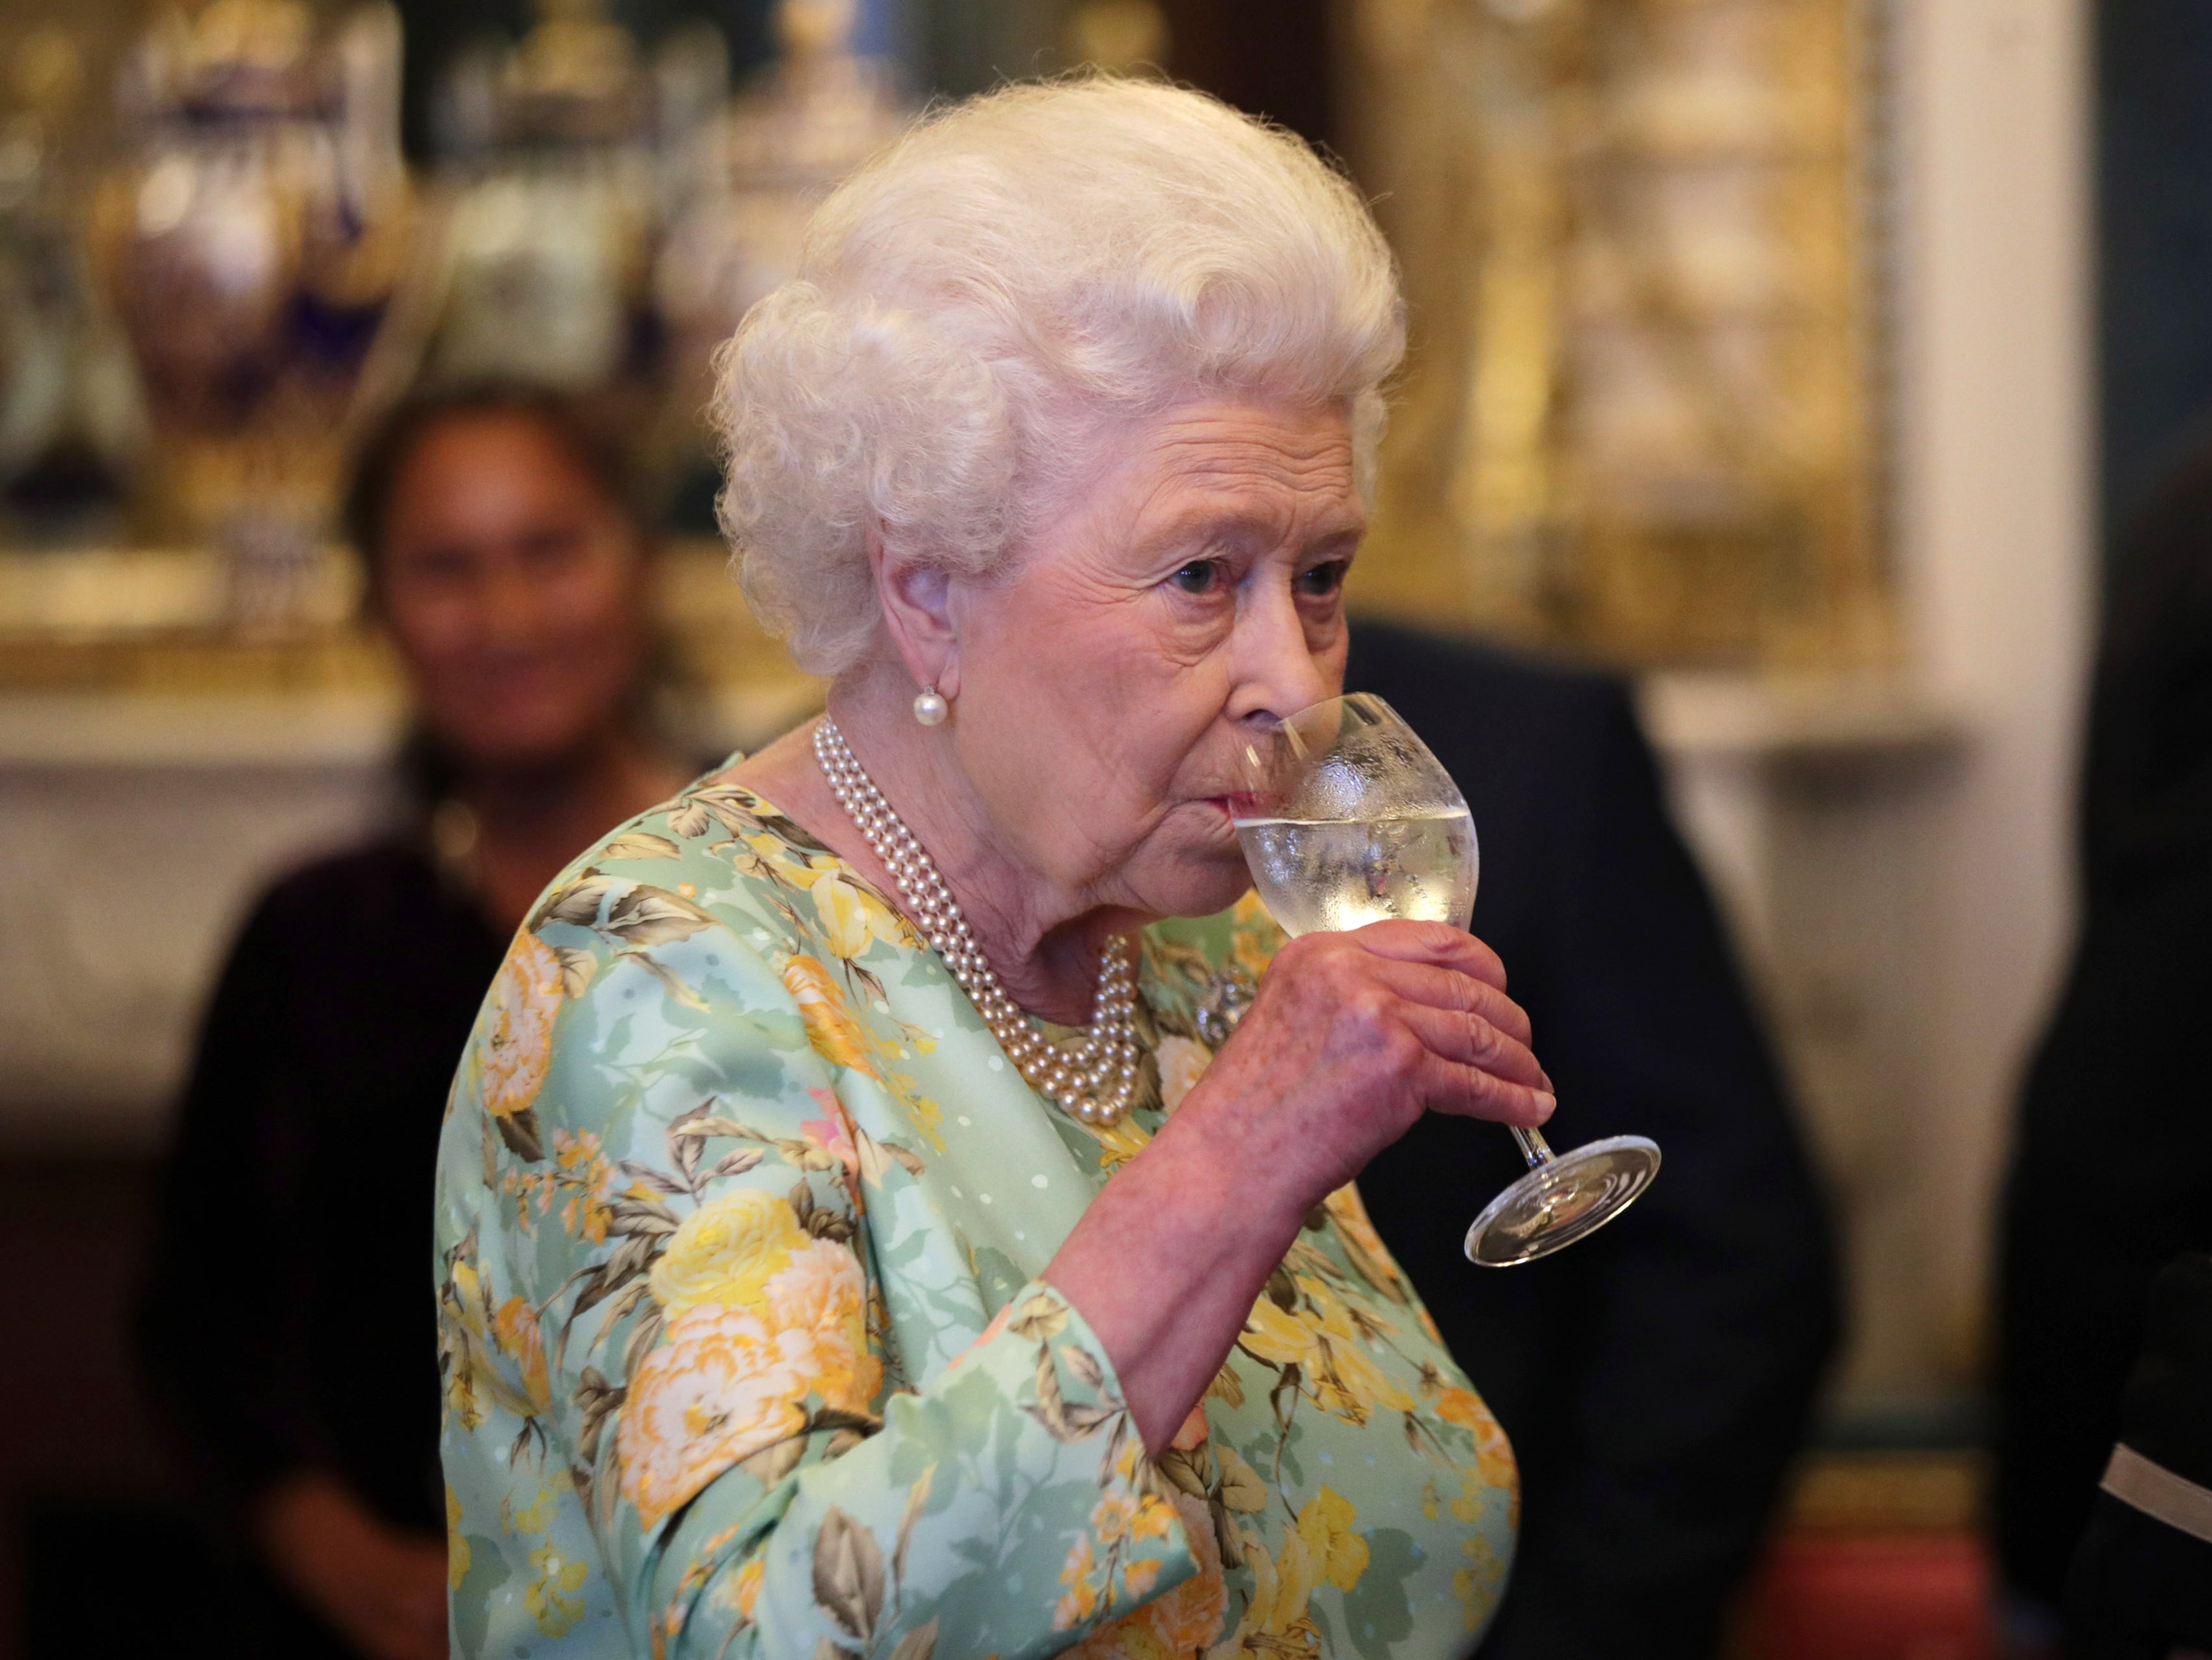 The Queen at a Buckingham Palace reception in July 2017